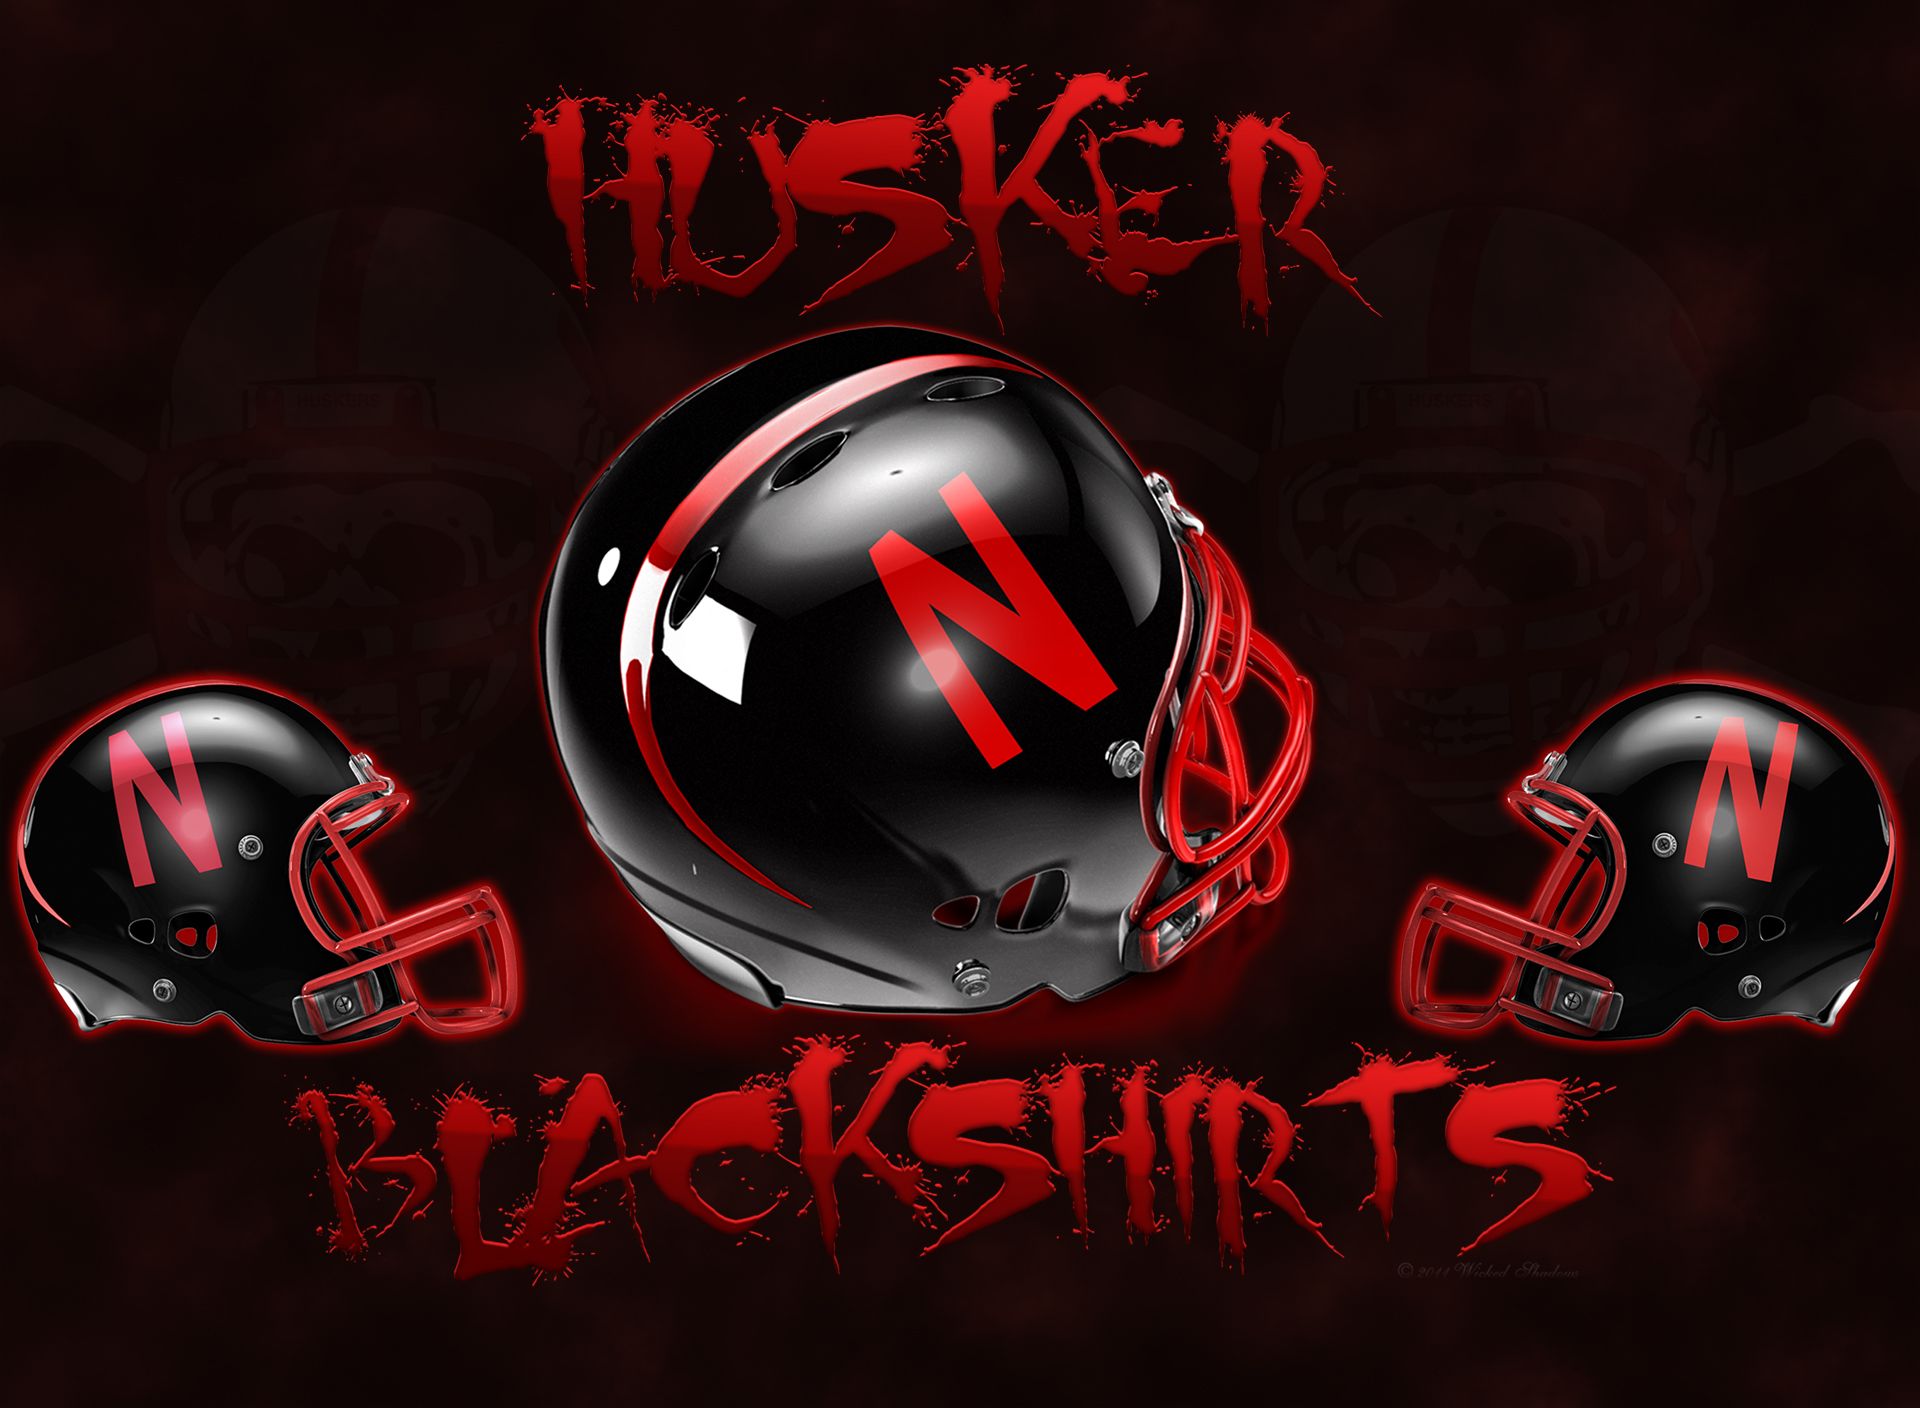 Wallpapers By Wicked Shadows Husker Backgrounds